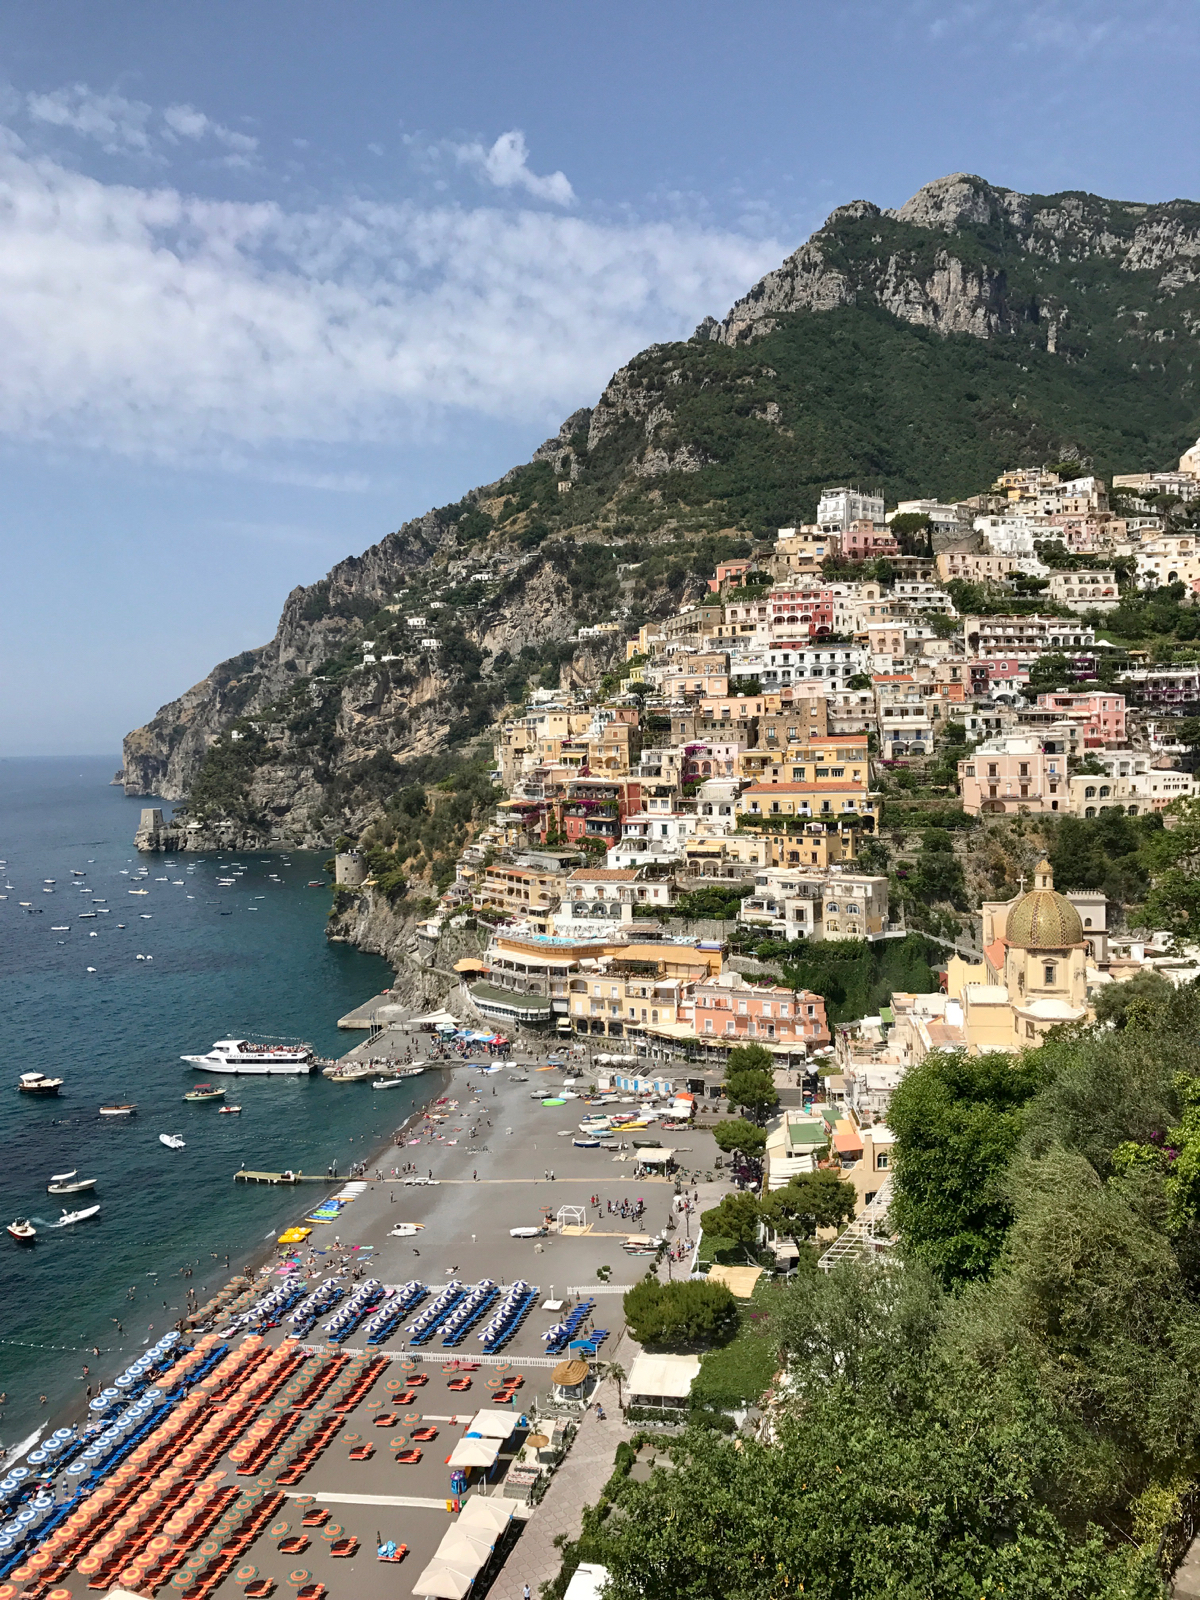 Positano, Italy, What to see and do in Positano, Where to Eat in Positano